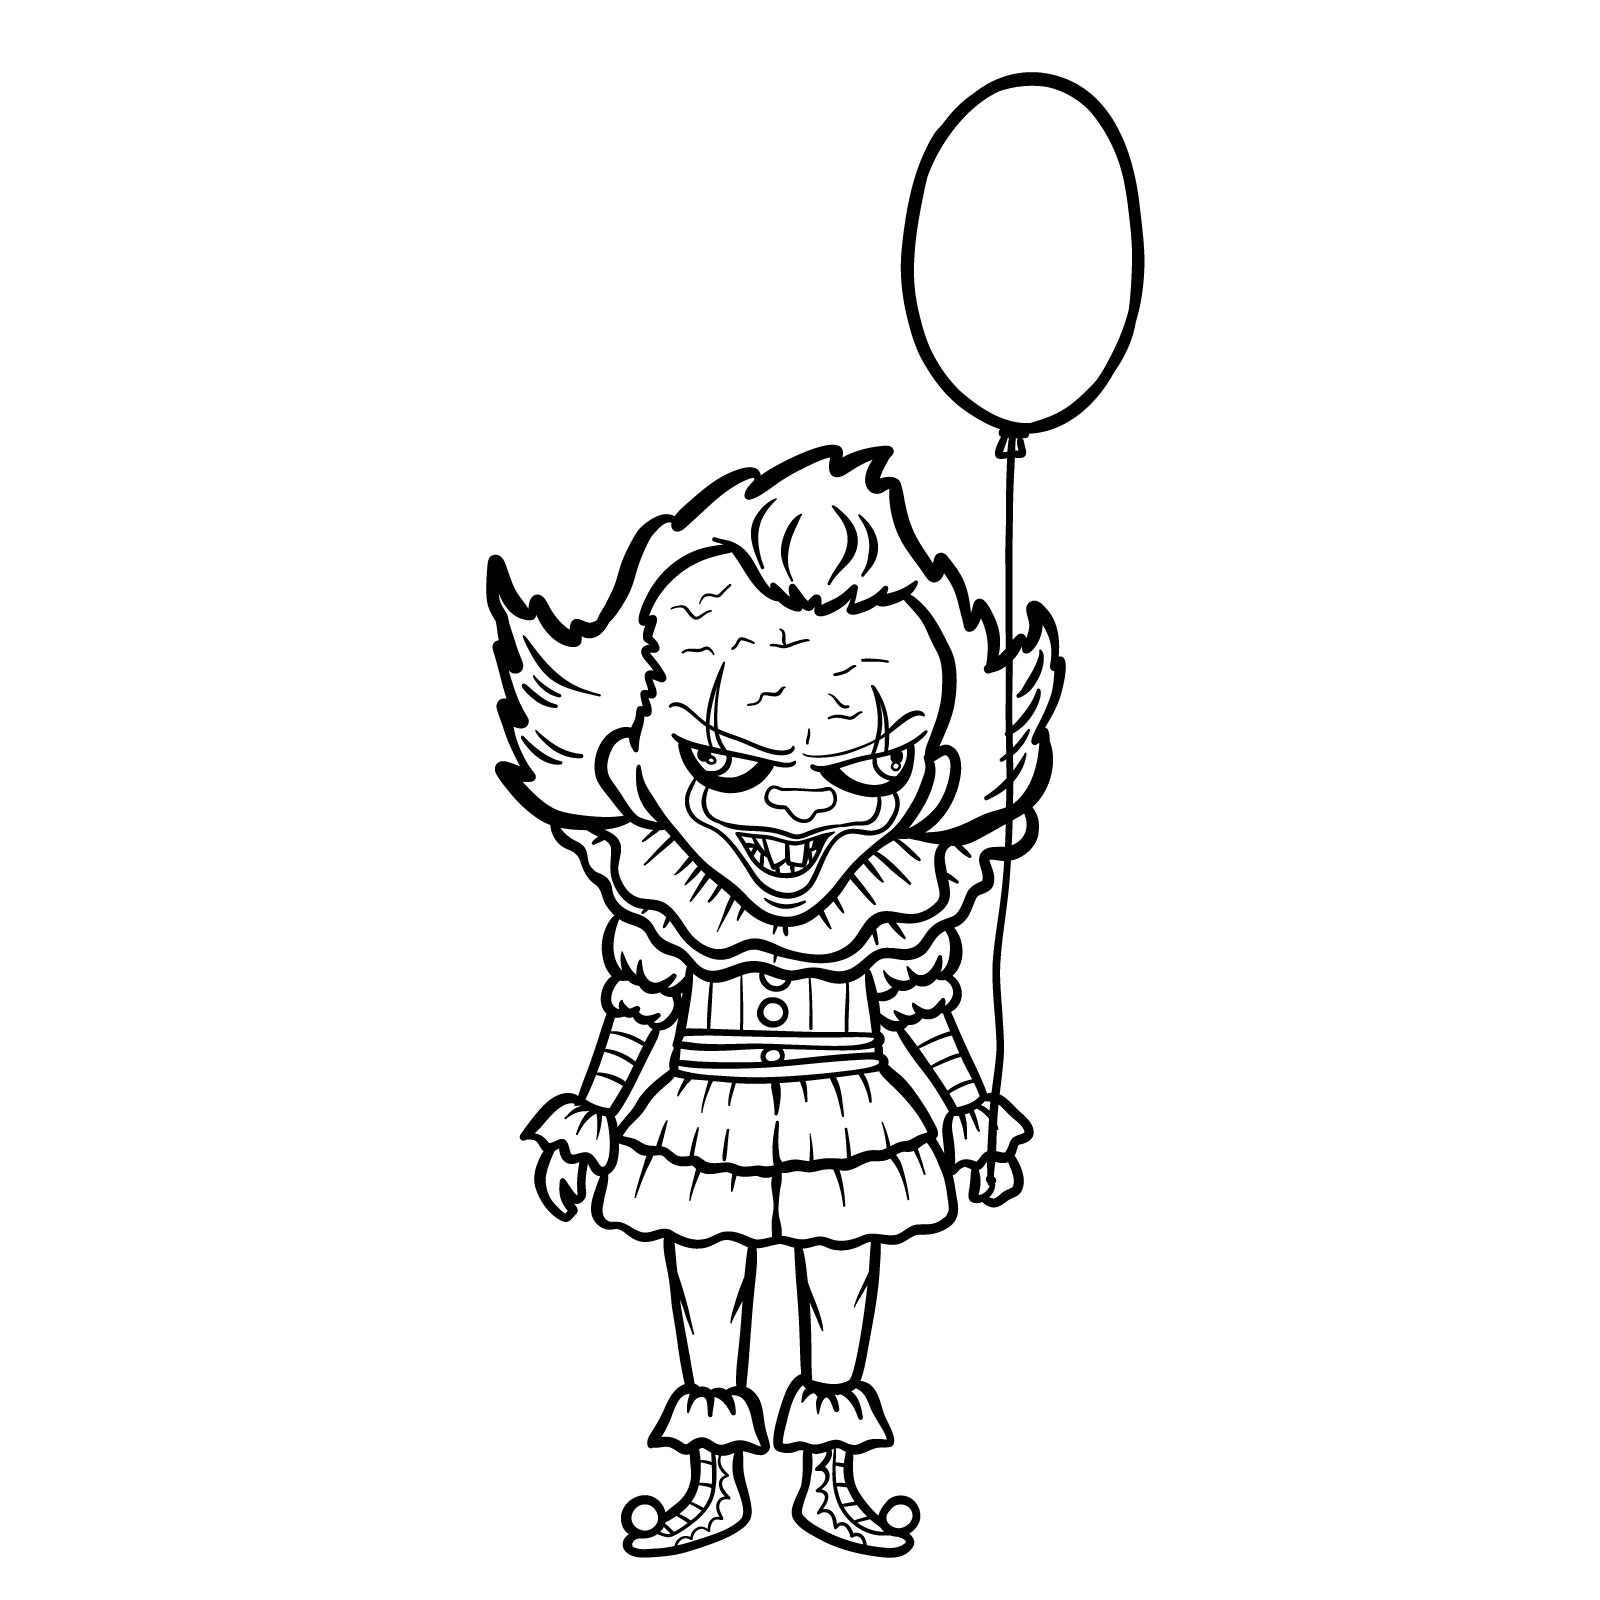 How to draw chibi Pennywise - final step